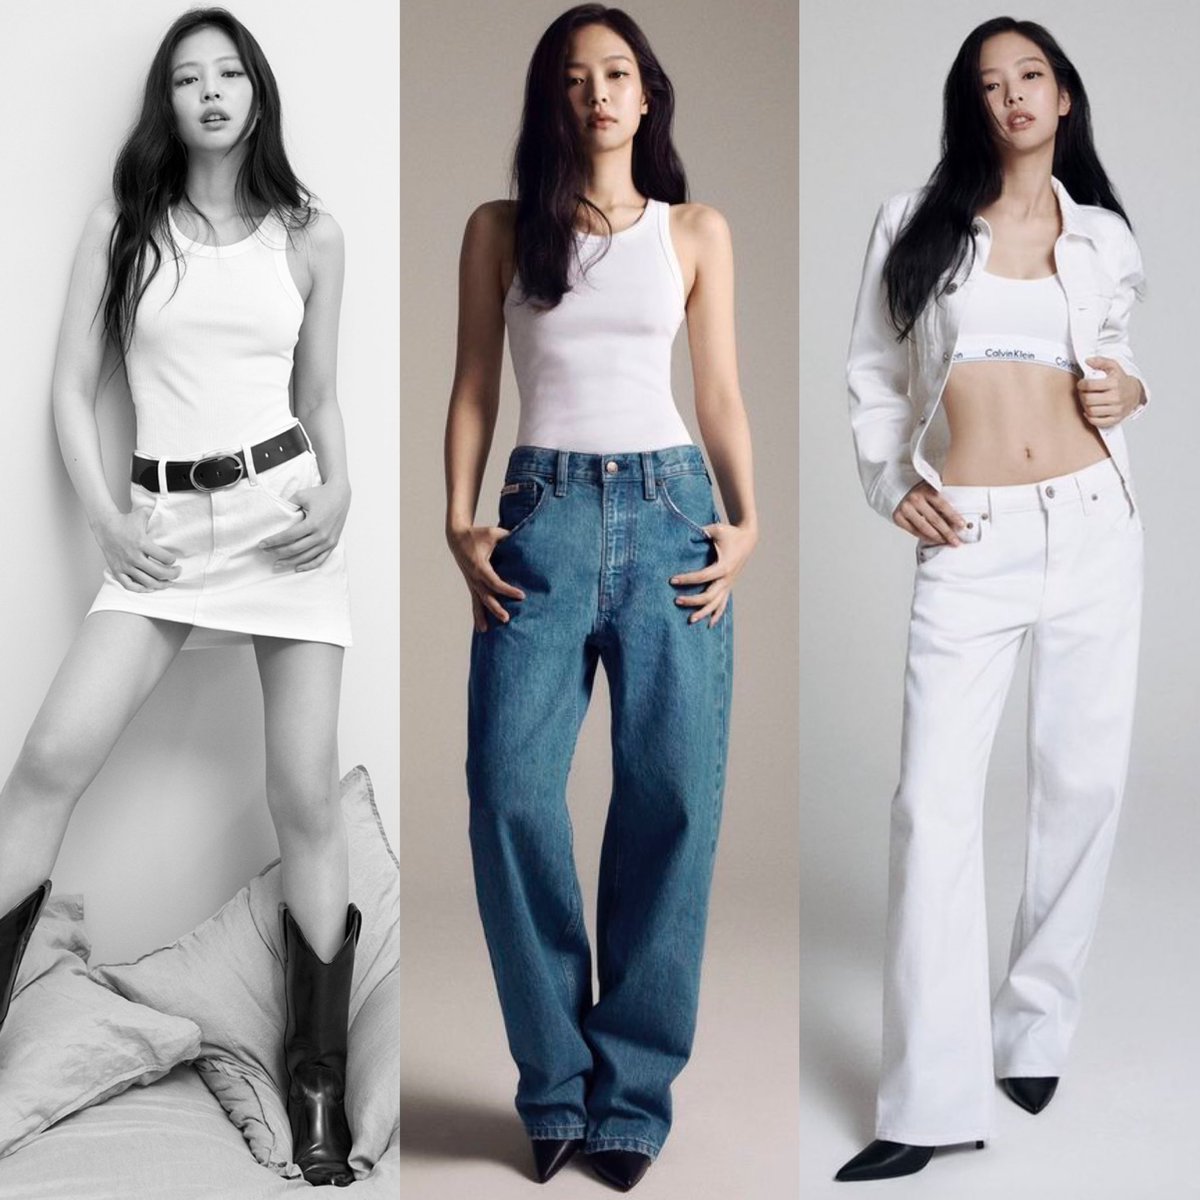 This is Jennie's world. We are just people living in her world @CalvinKlein